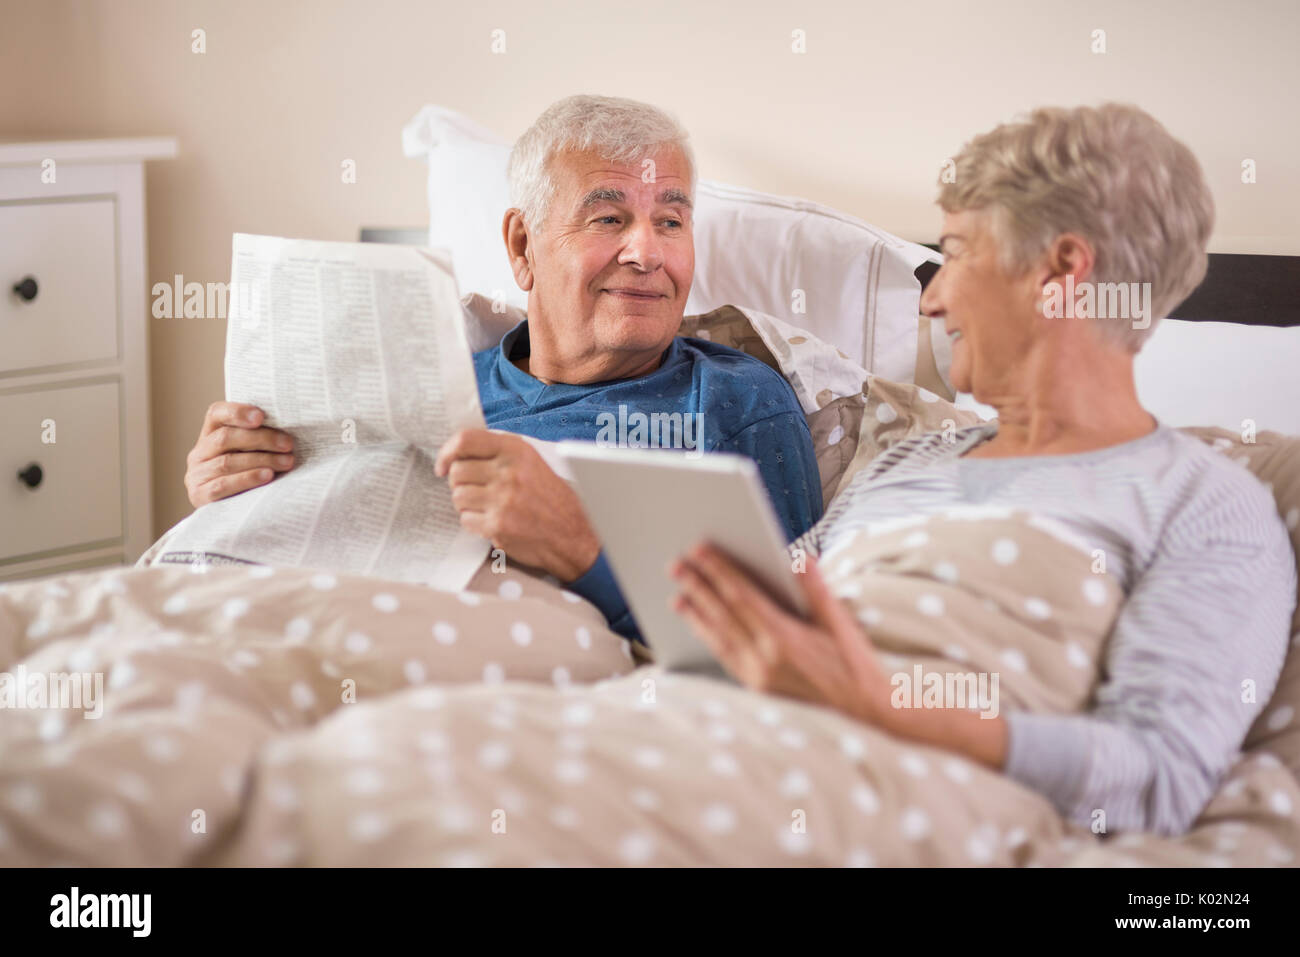 Both looking for some news on the Internet Stock Photo